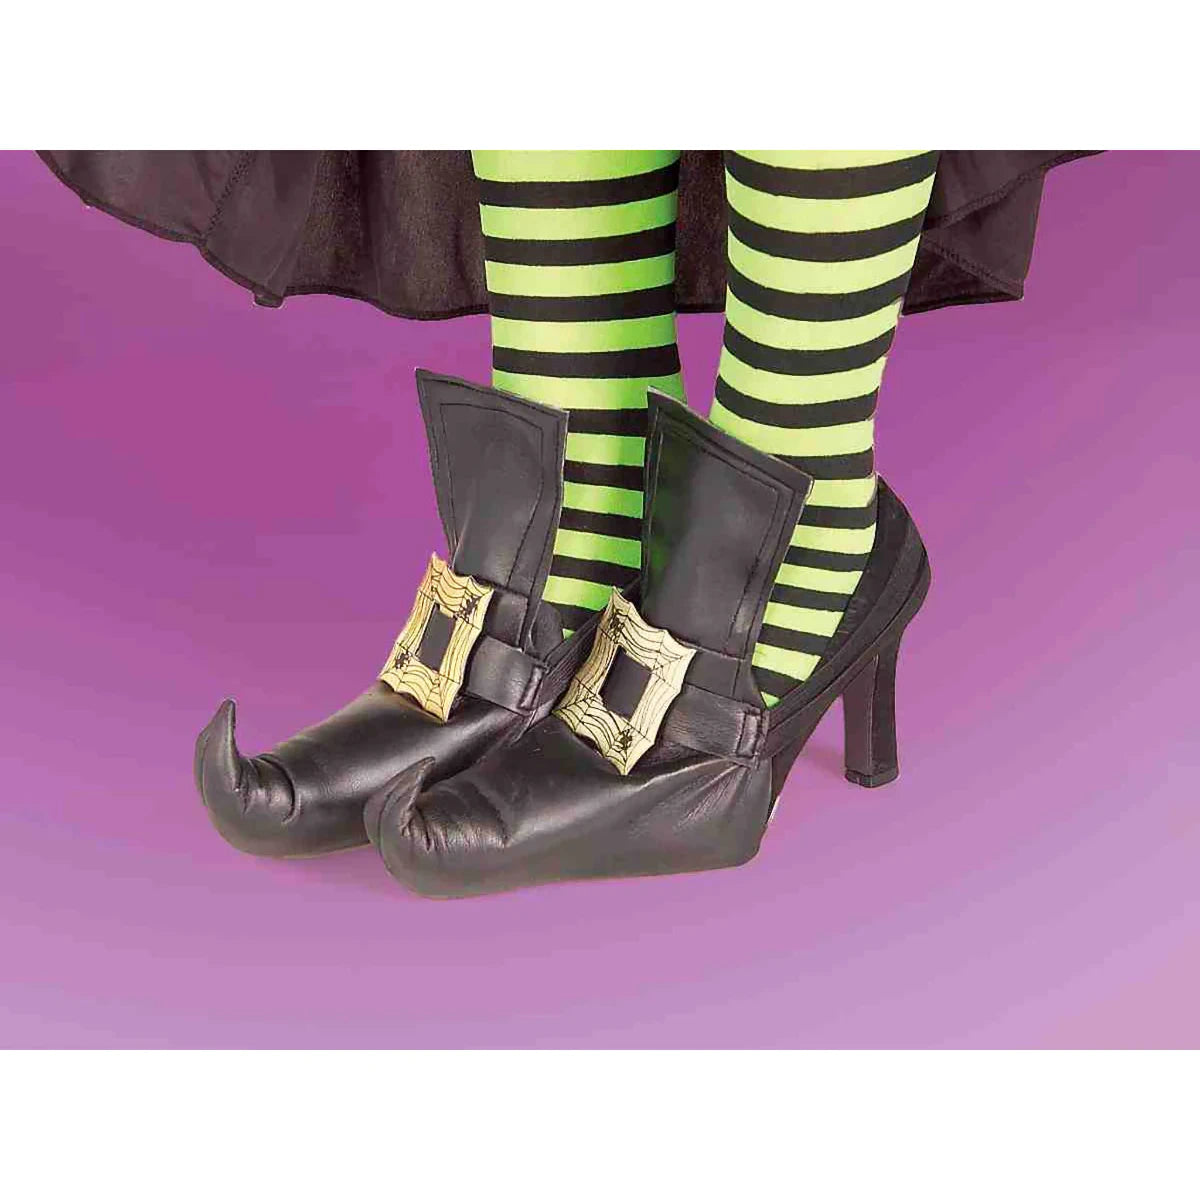 Witch Shoe covers black with gold buckle